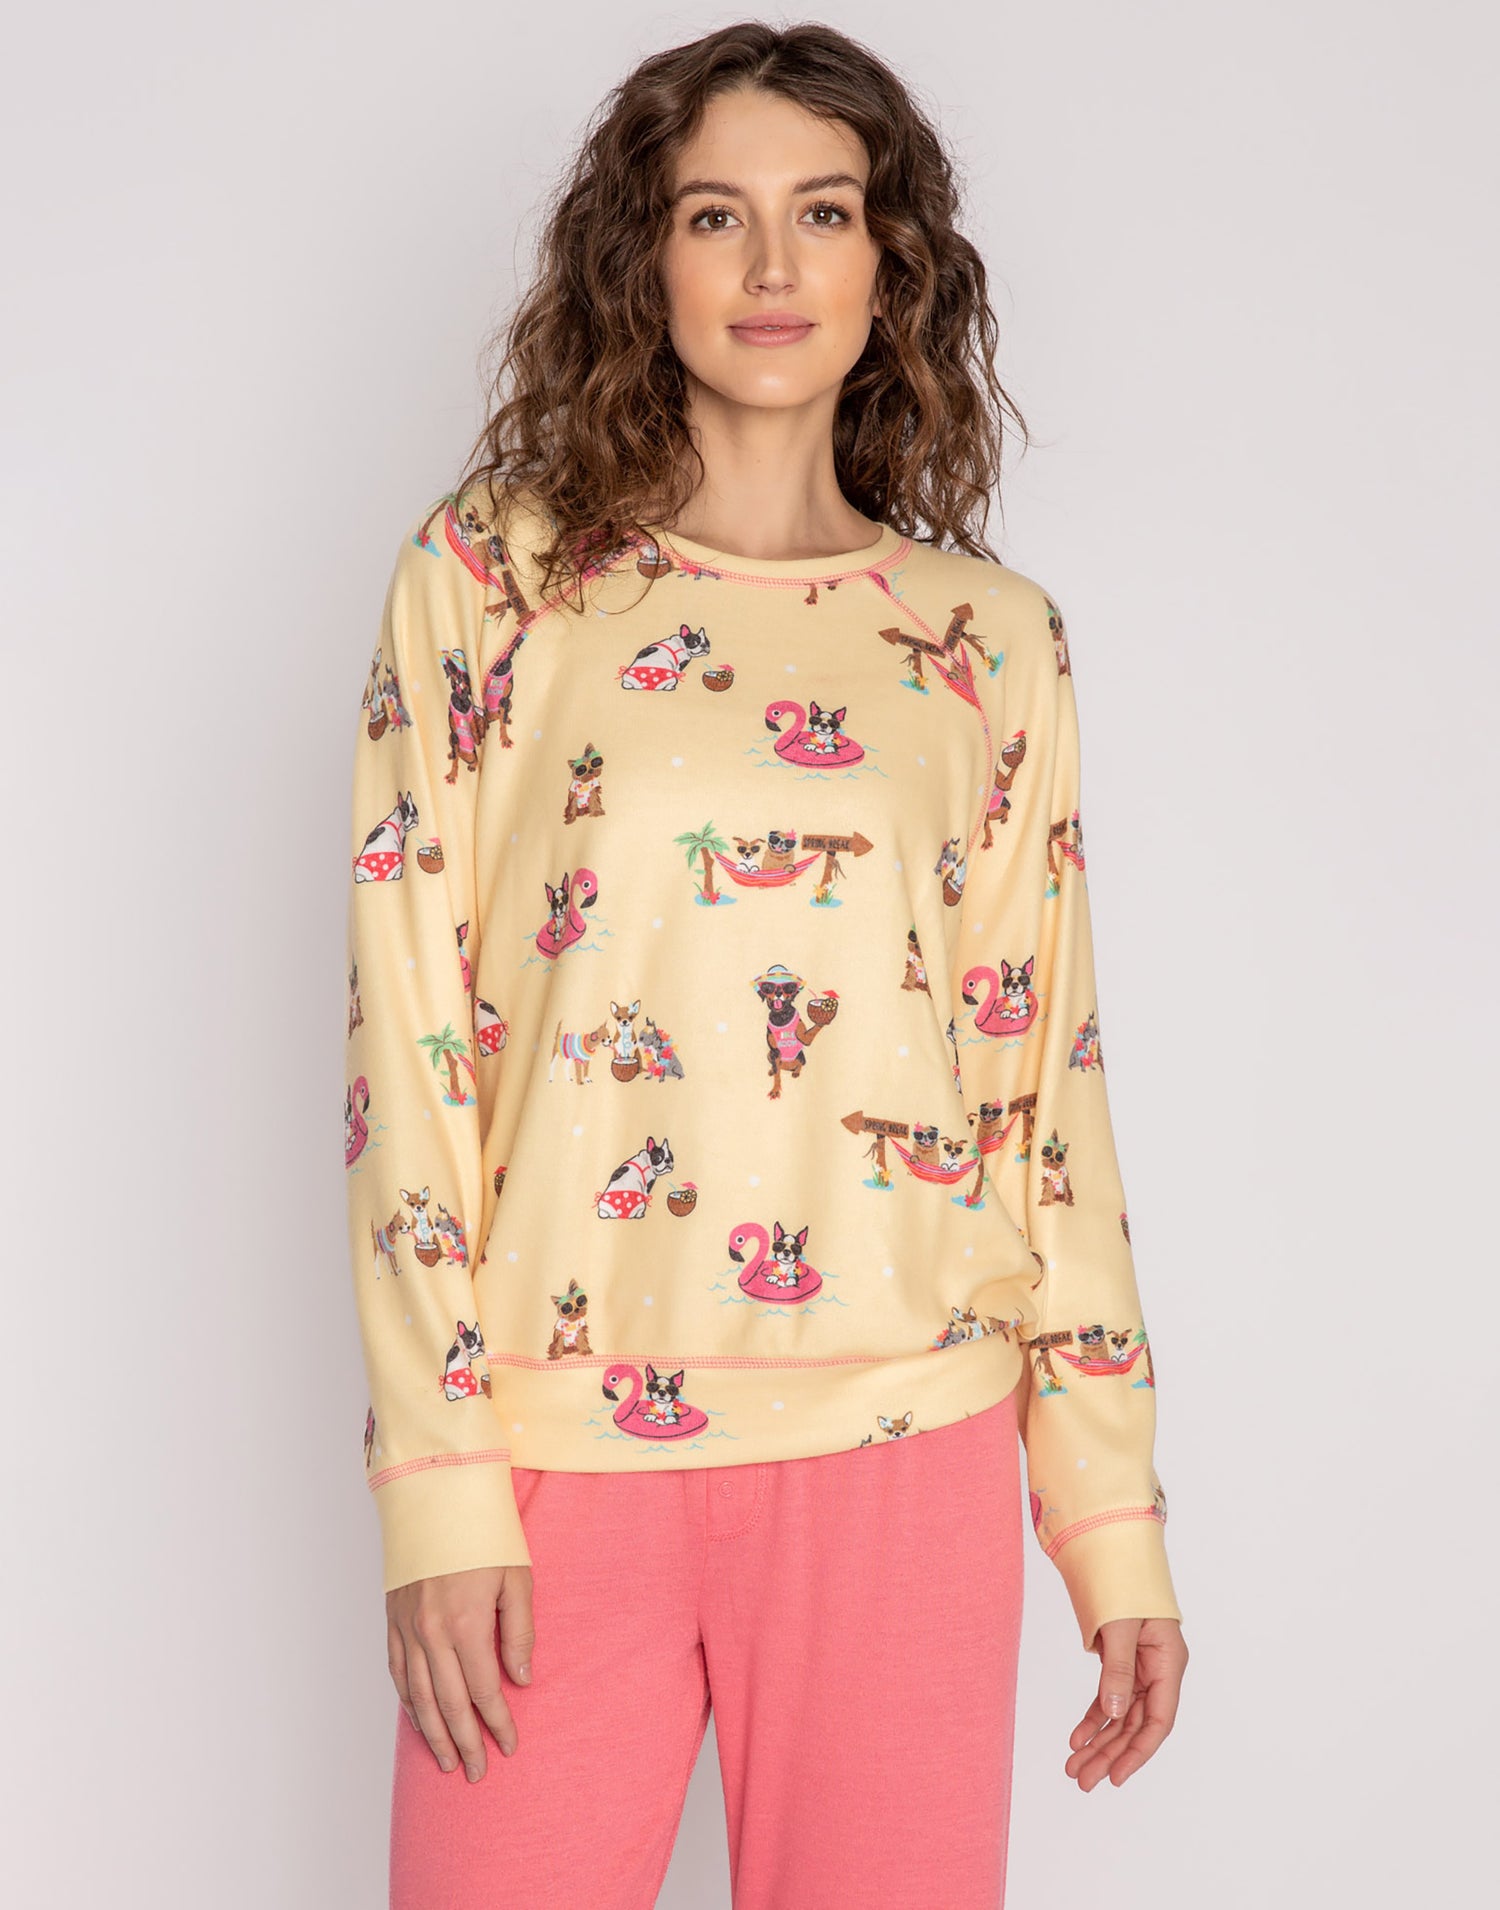 Spring Breeze Long Sleeve Top by P.J. Salvage in Yellow Mist - Front View